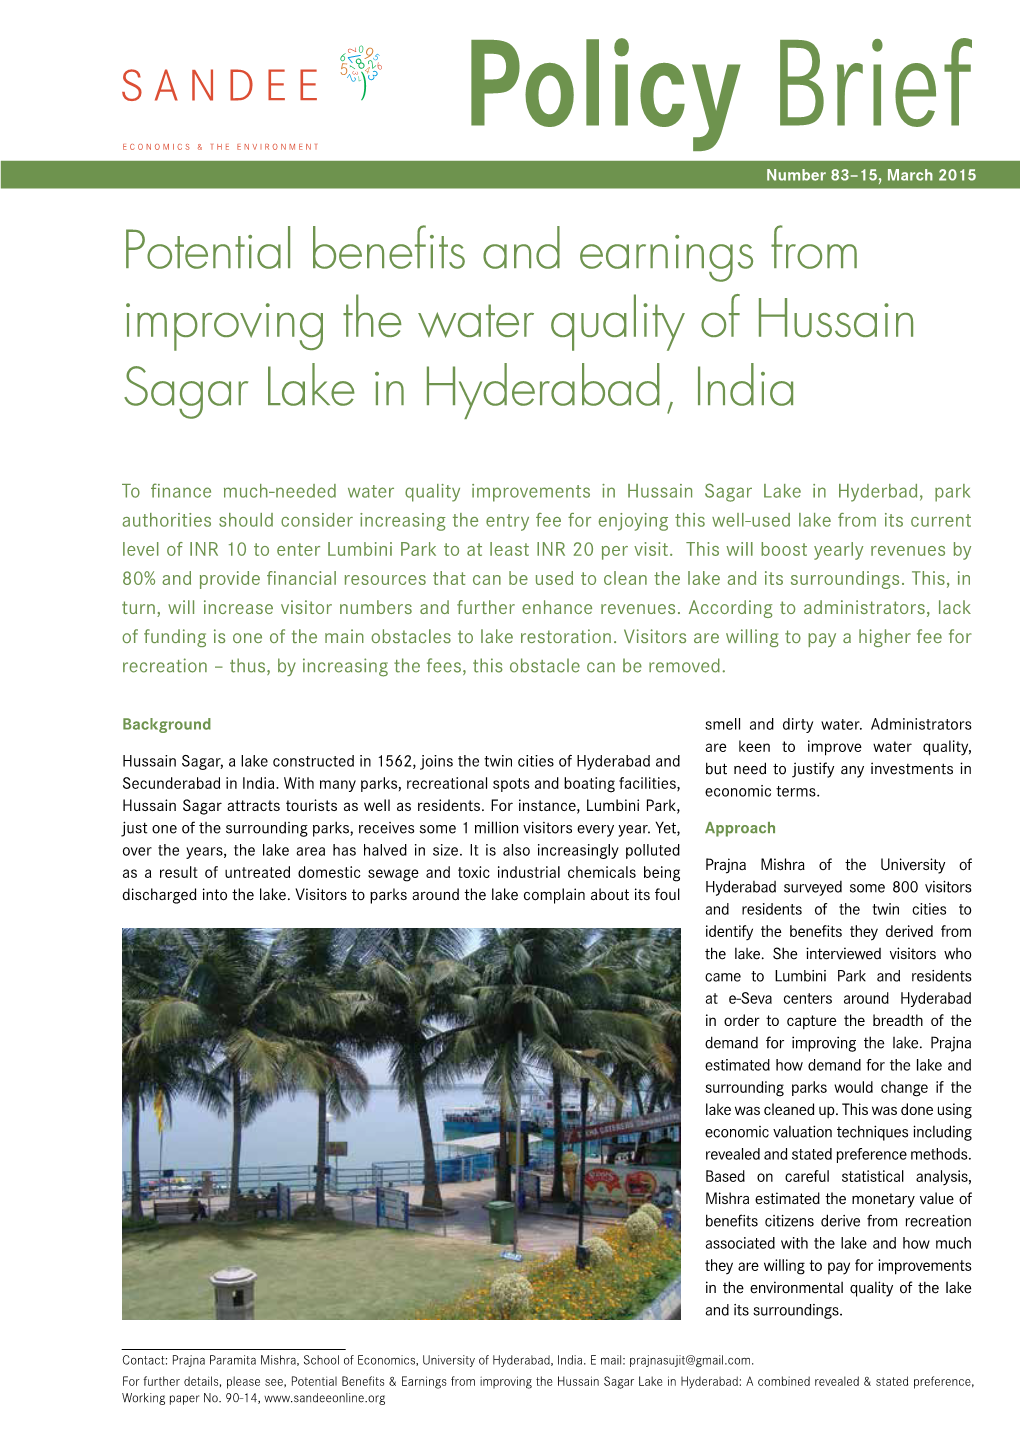 Potential Benefits and Earnings from Improving the Water Quality of Hussain Sagar Lake in Hyderabad, India